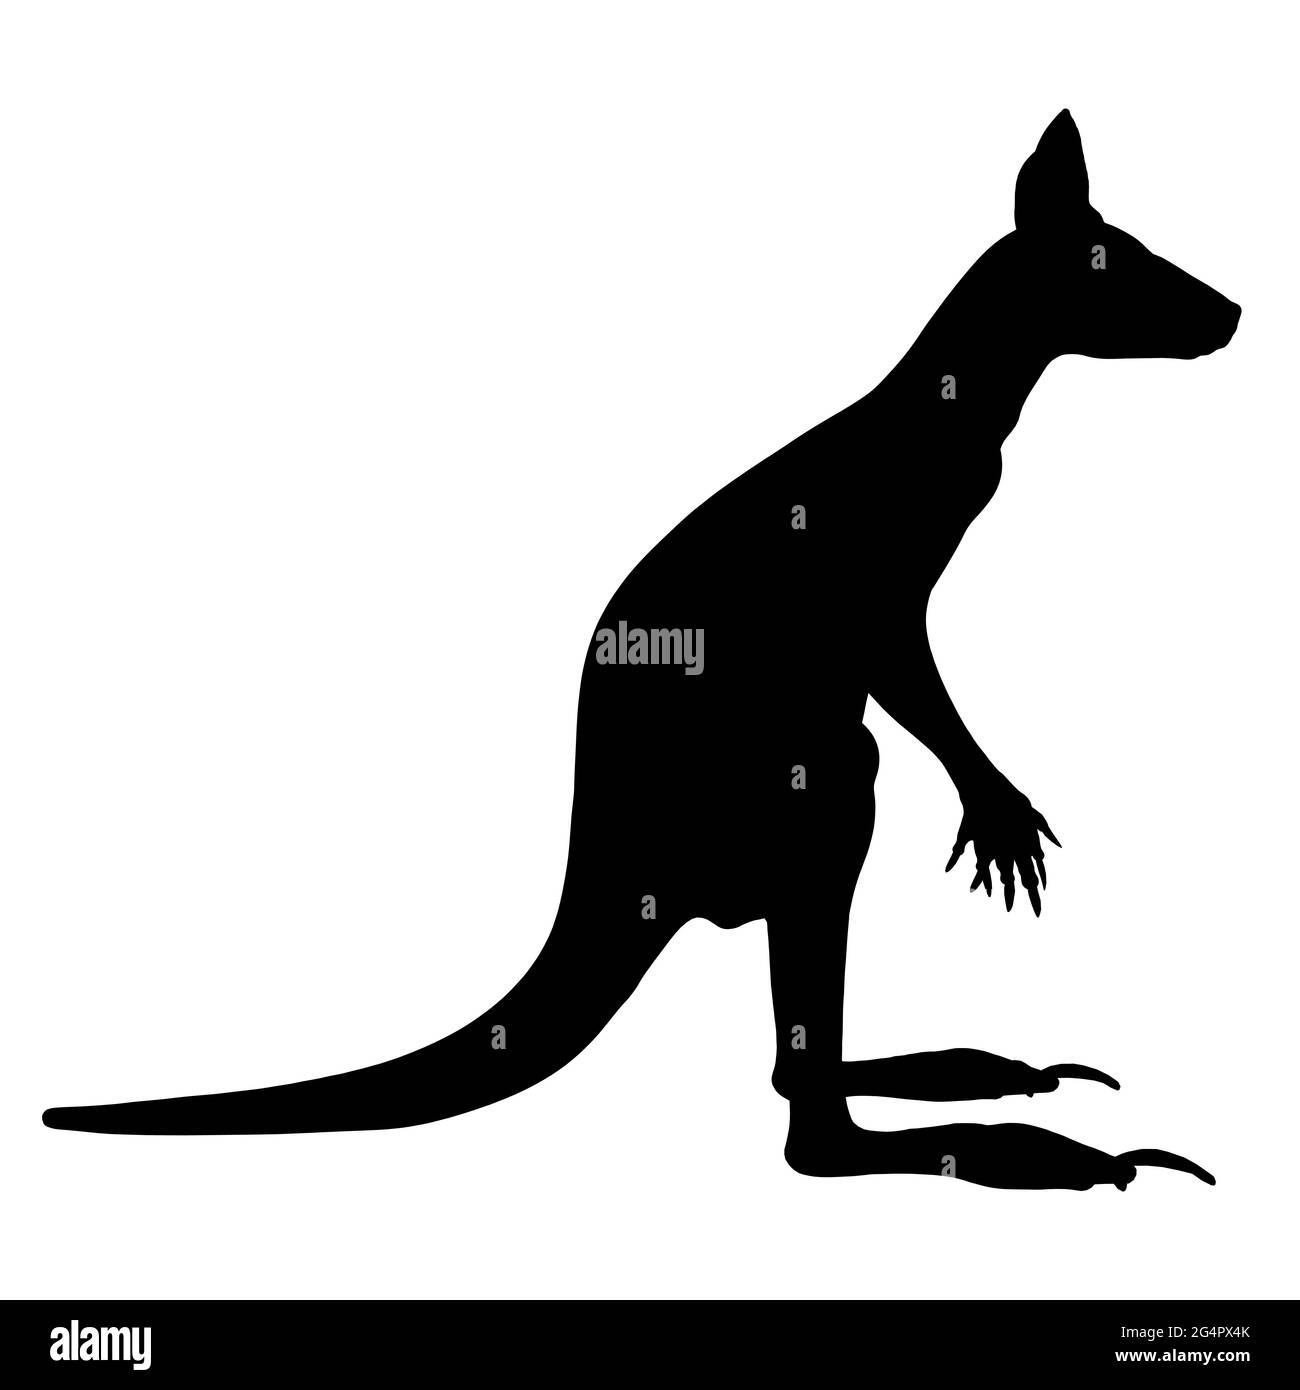 Kangaroo silhouette isolated on white background. Side view. Vector illustration. Stock Vector